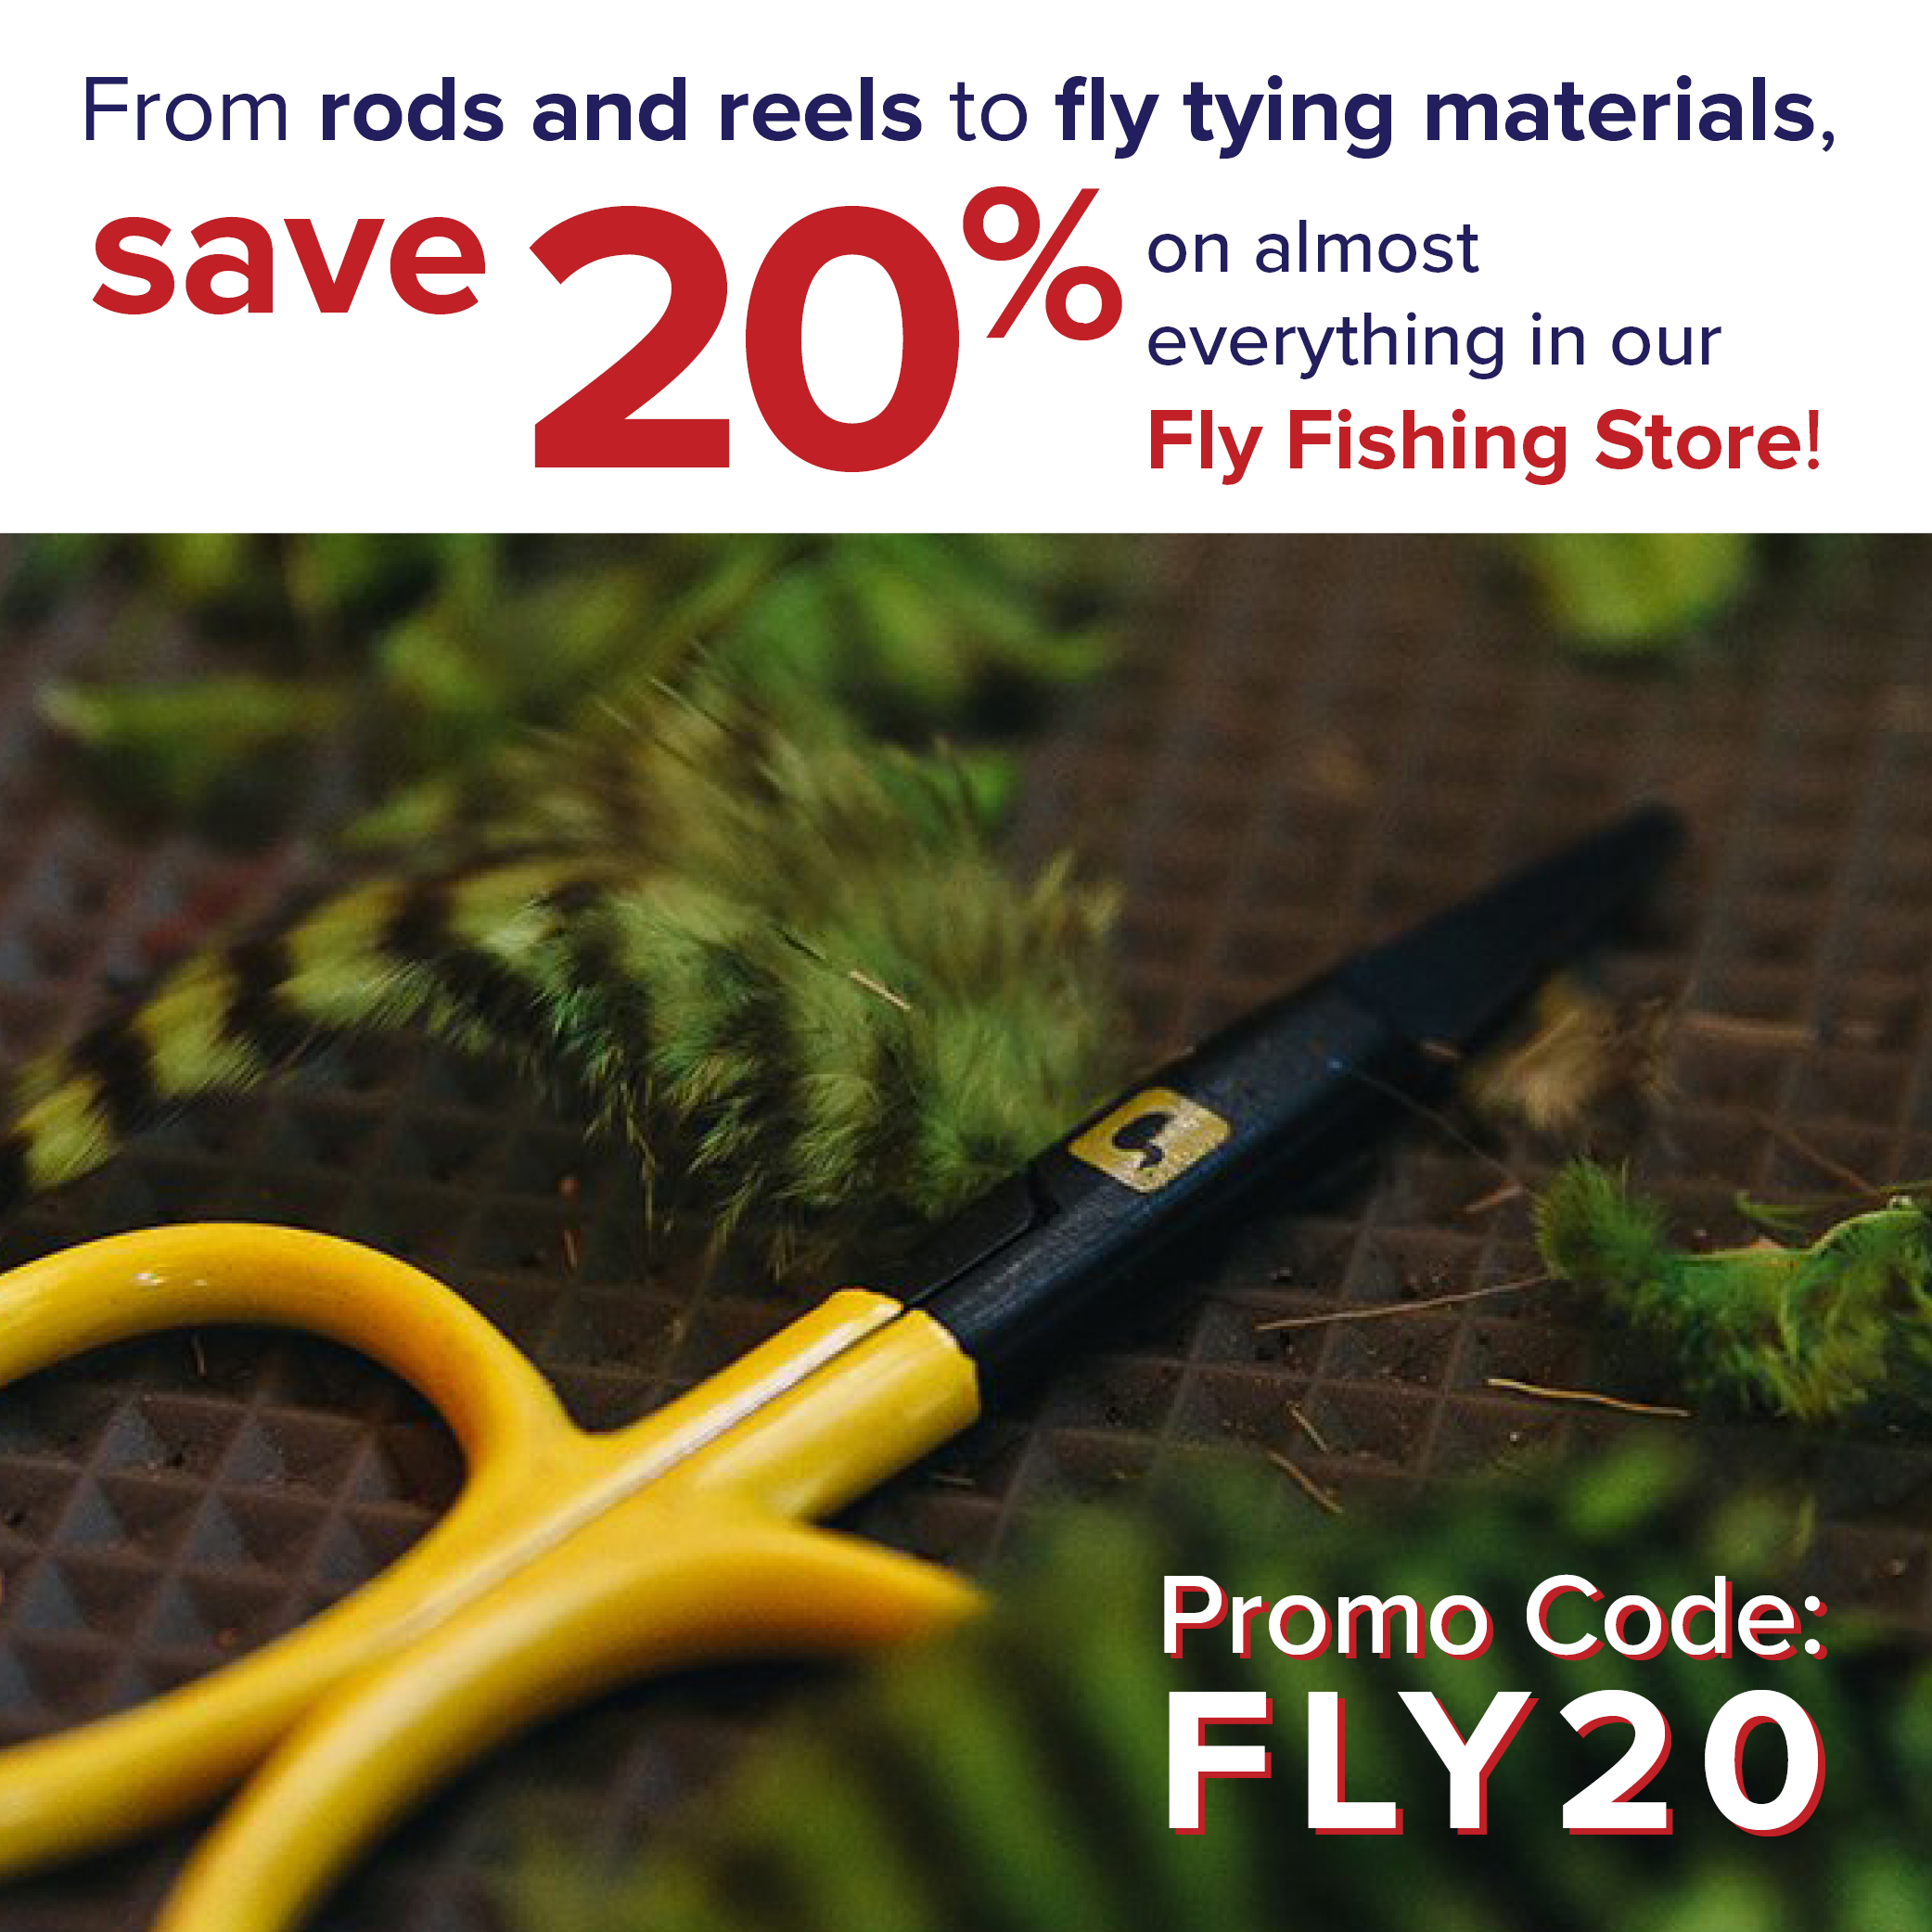 Save 20% on Fly Fishing